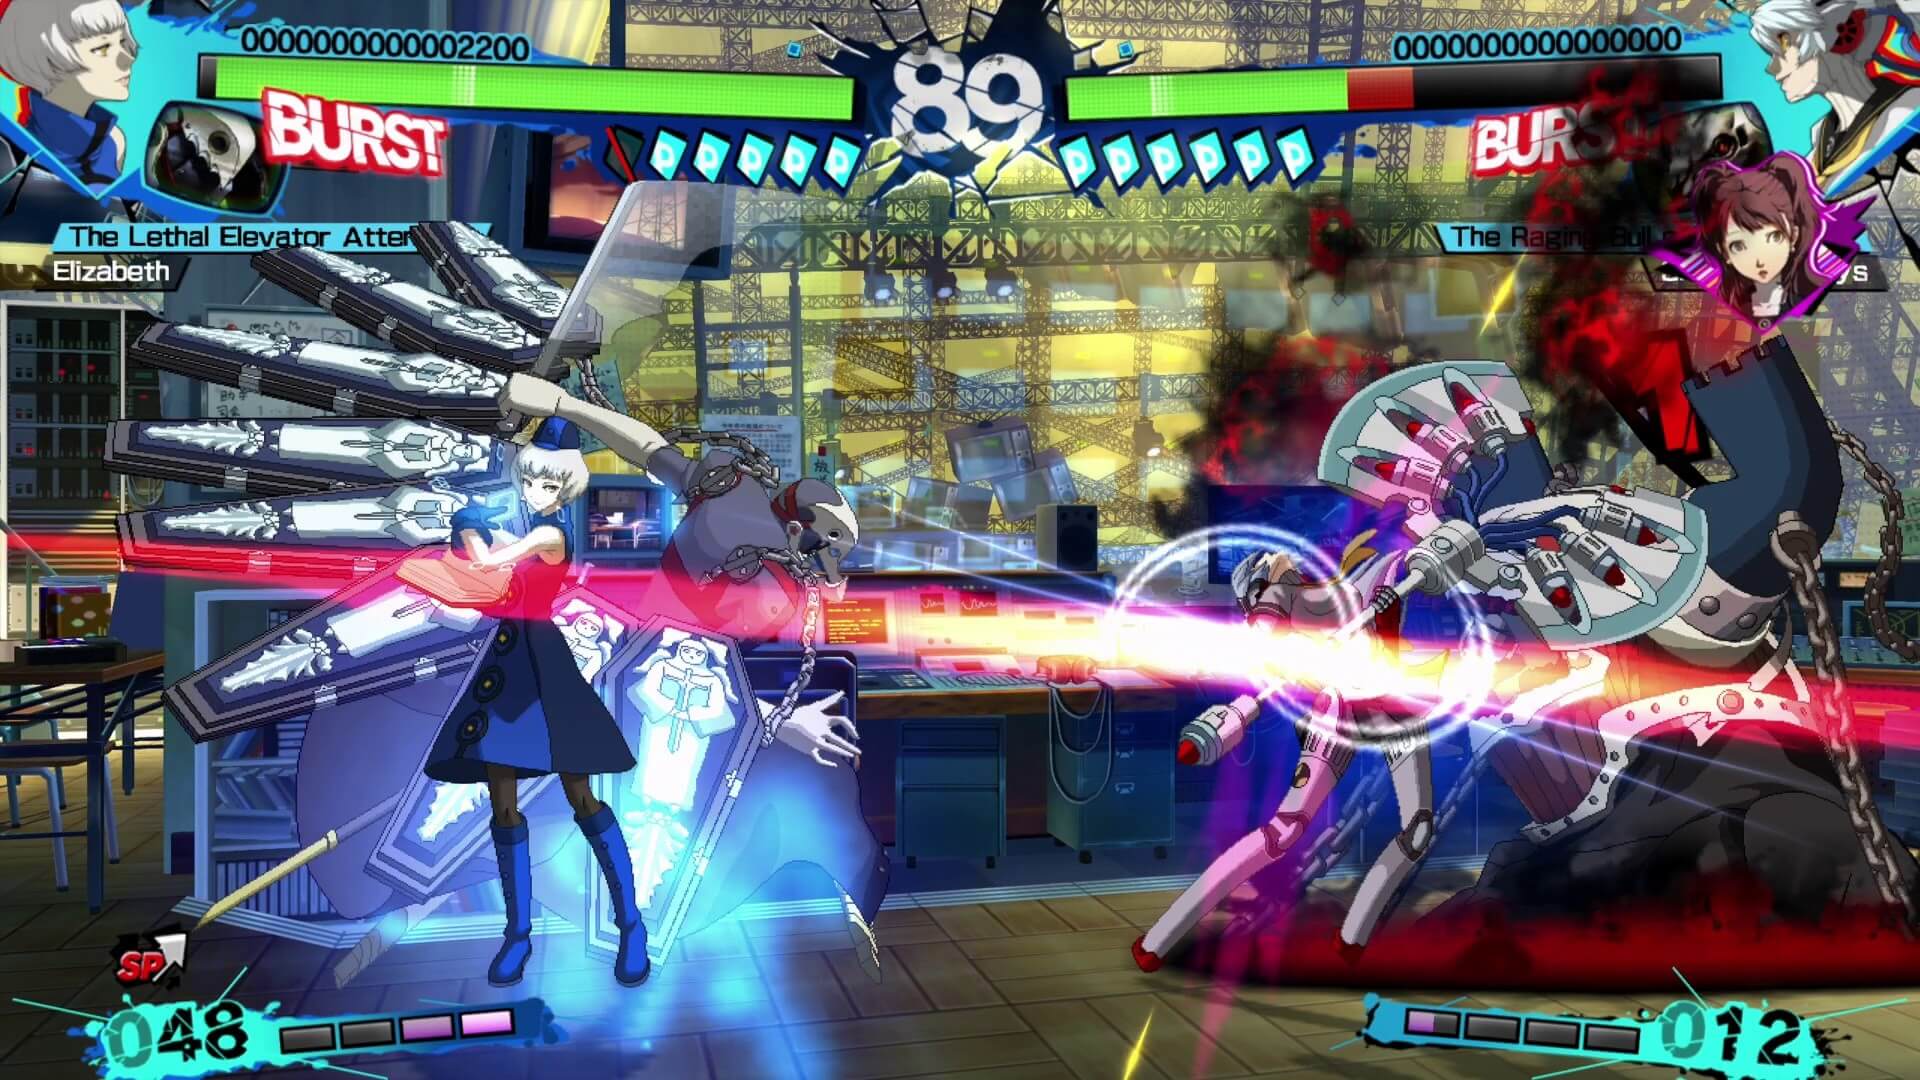 Elizabeth faces off against Shadow Labrys in Persona 4 Arena Ultimax